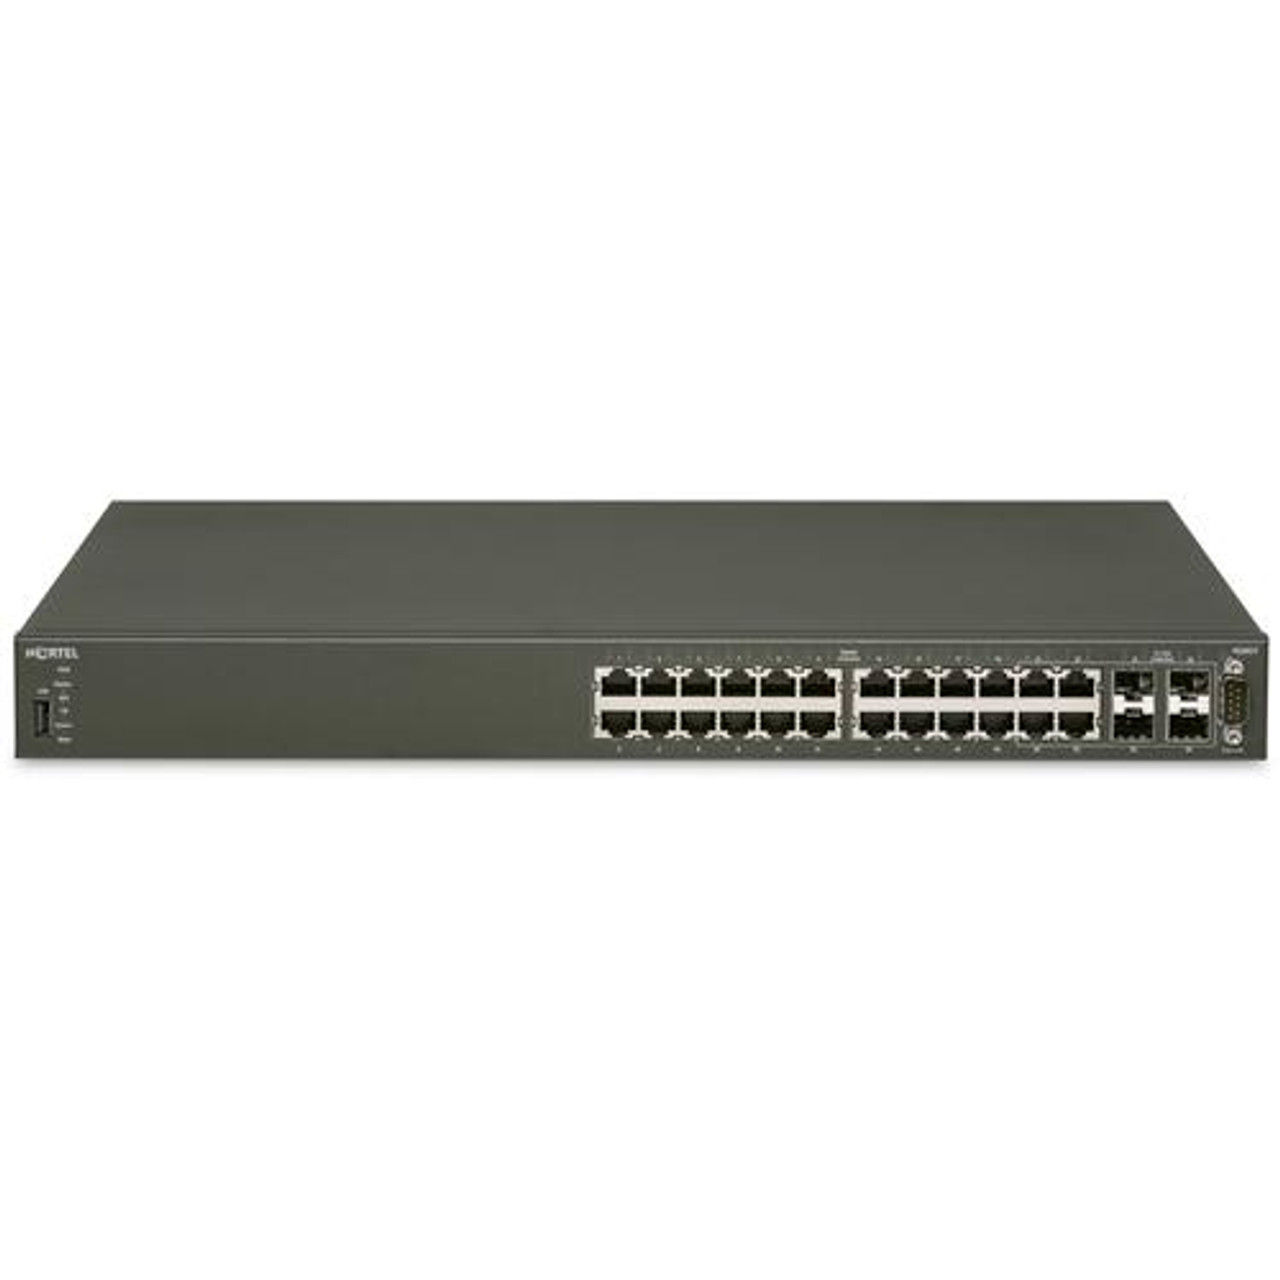 AL4500C05-E6 Nortel 4524GT Gigabit Ethernet Routing External Switch with 24-Ports 10/100/1000 BaseTX Ports SFP with Power Cord (Refurbished)